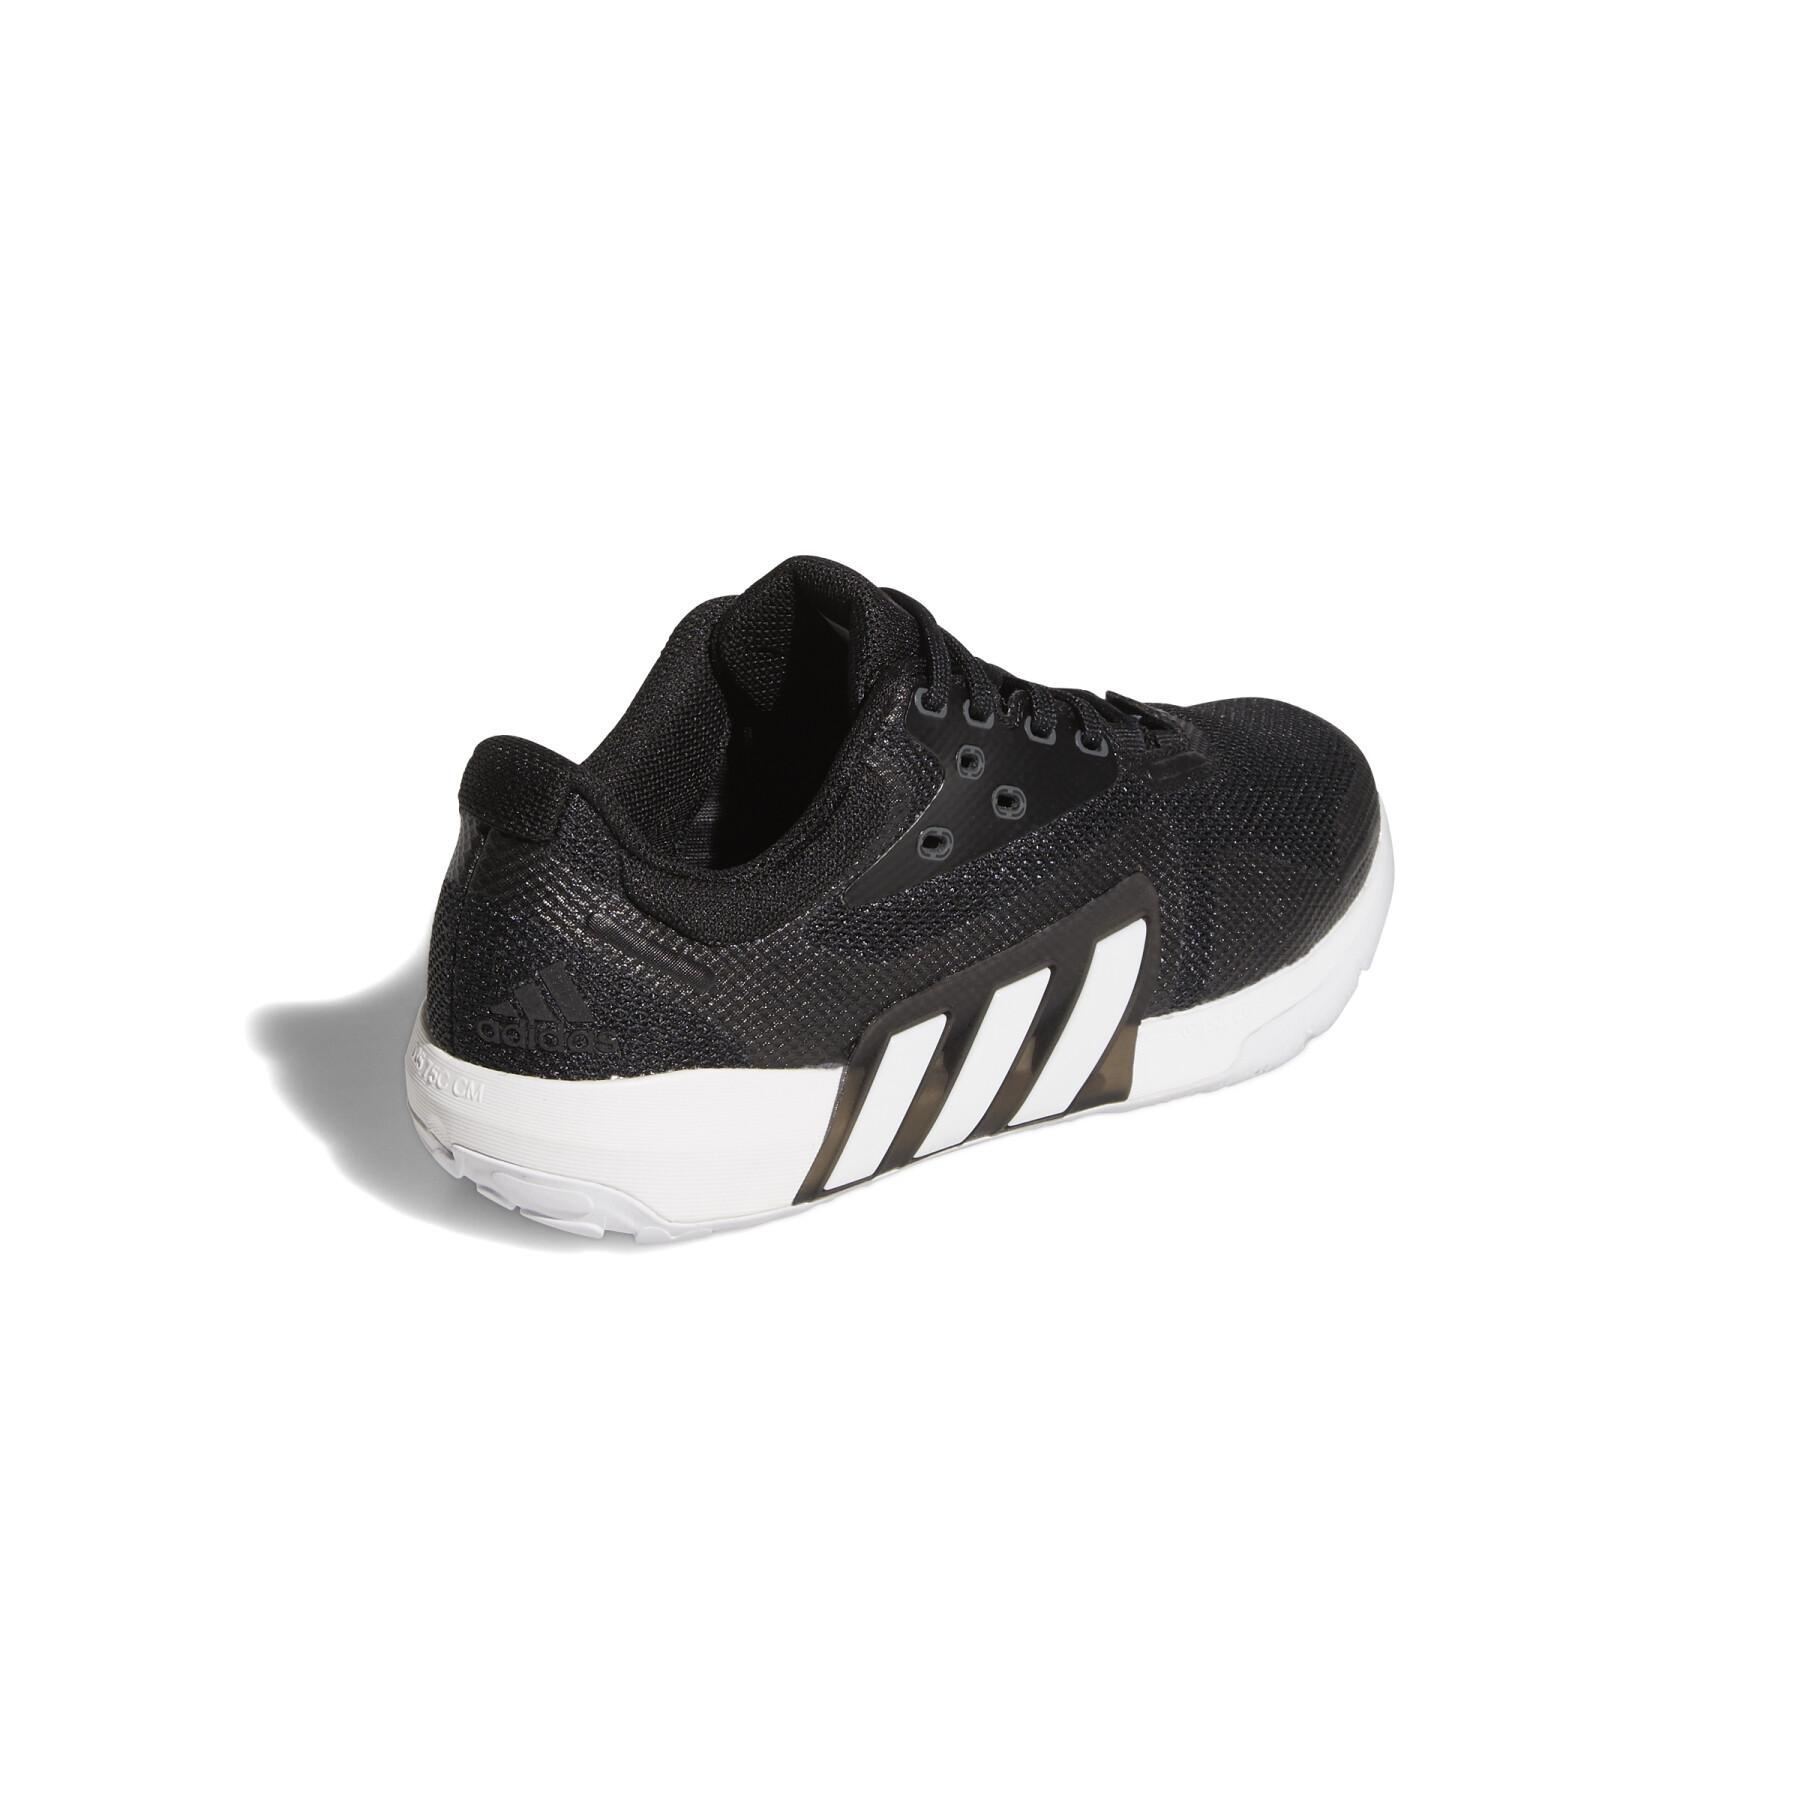 Chaussures femme adidas Dropset Trainer